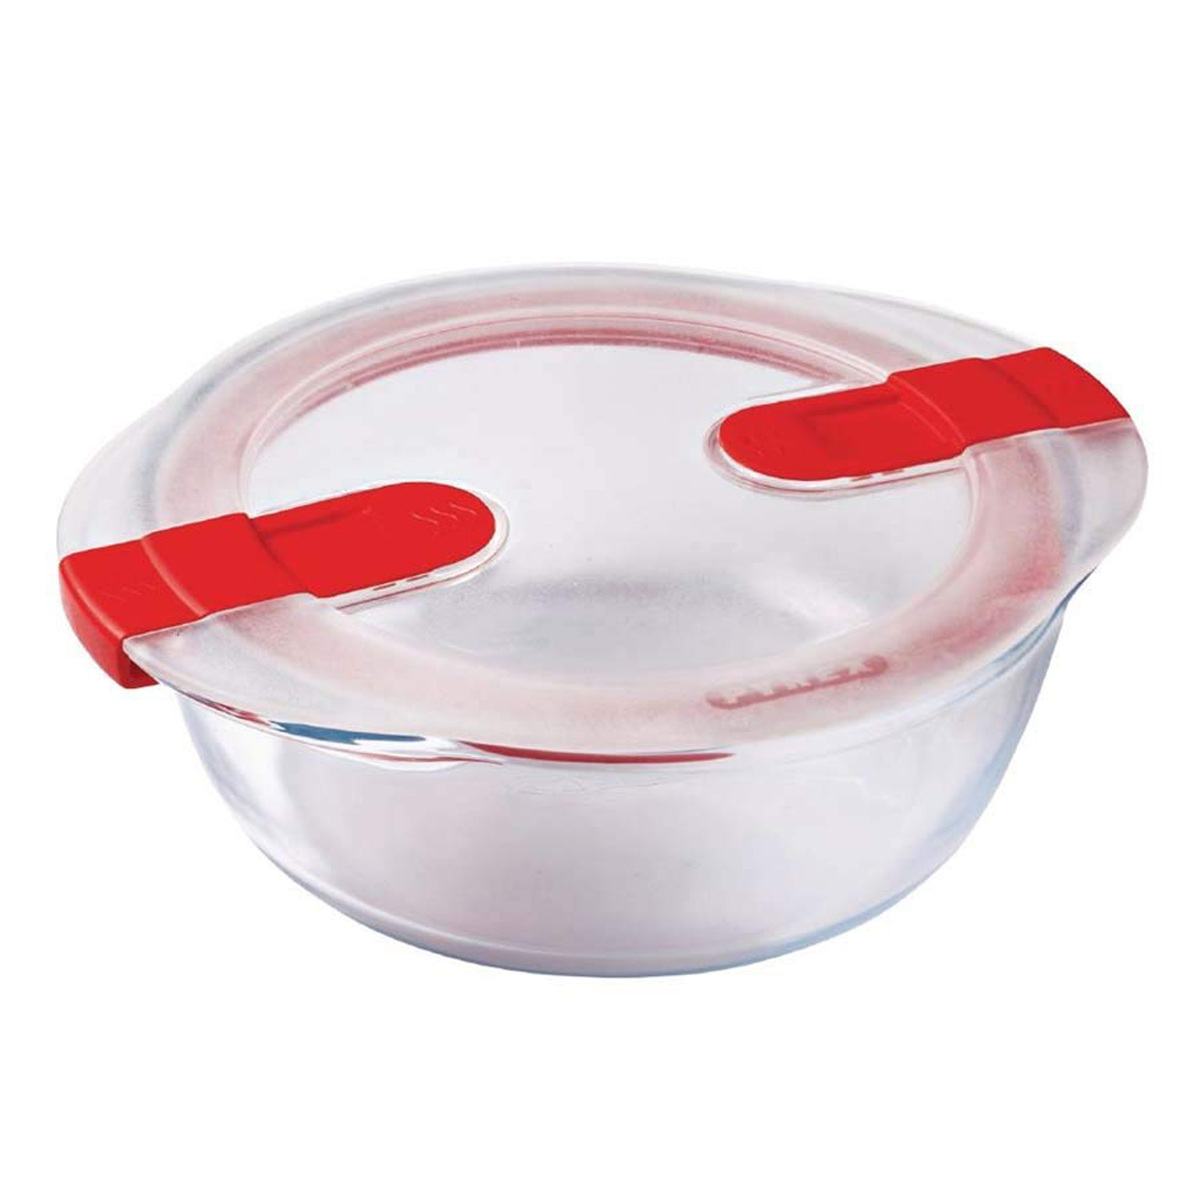 Pyrex Round Oven Dish with Plastic Lid, 14 X 12 inch